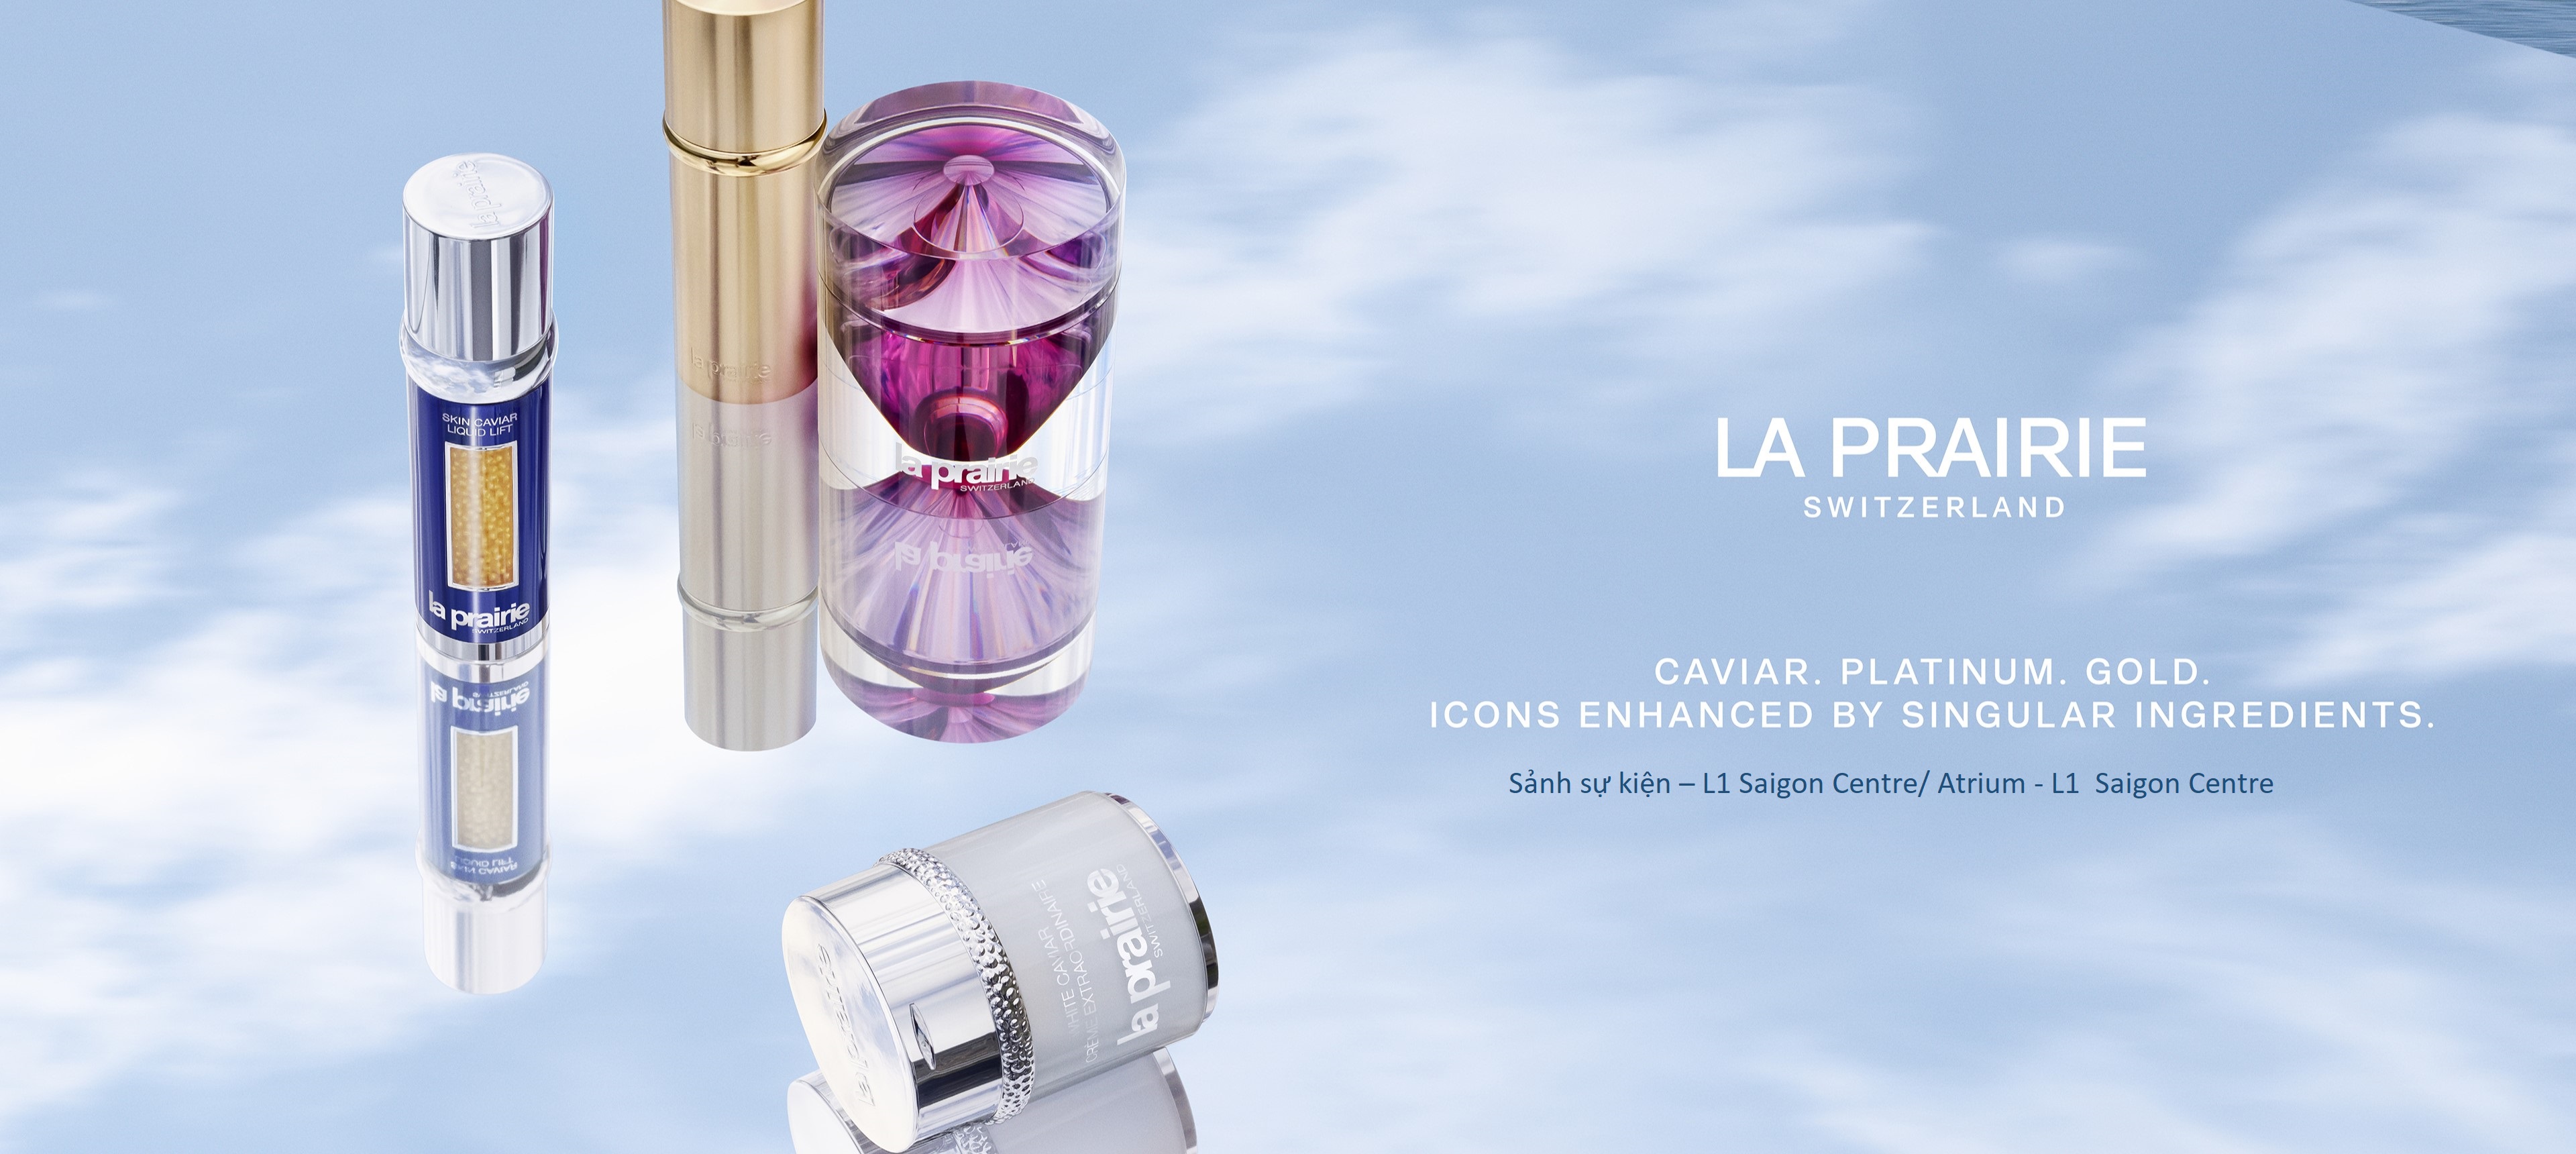 LA PRAIRIE THE COBALT CAFÉ - IMMERSE YOURSELF IN SWISS INDULGENCE